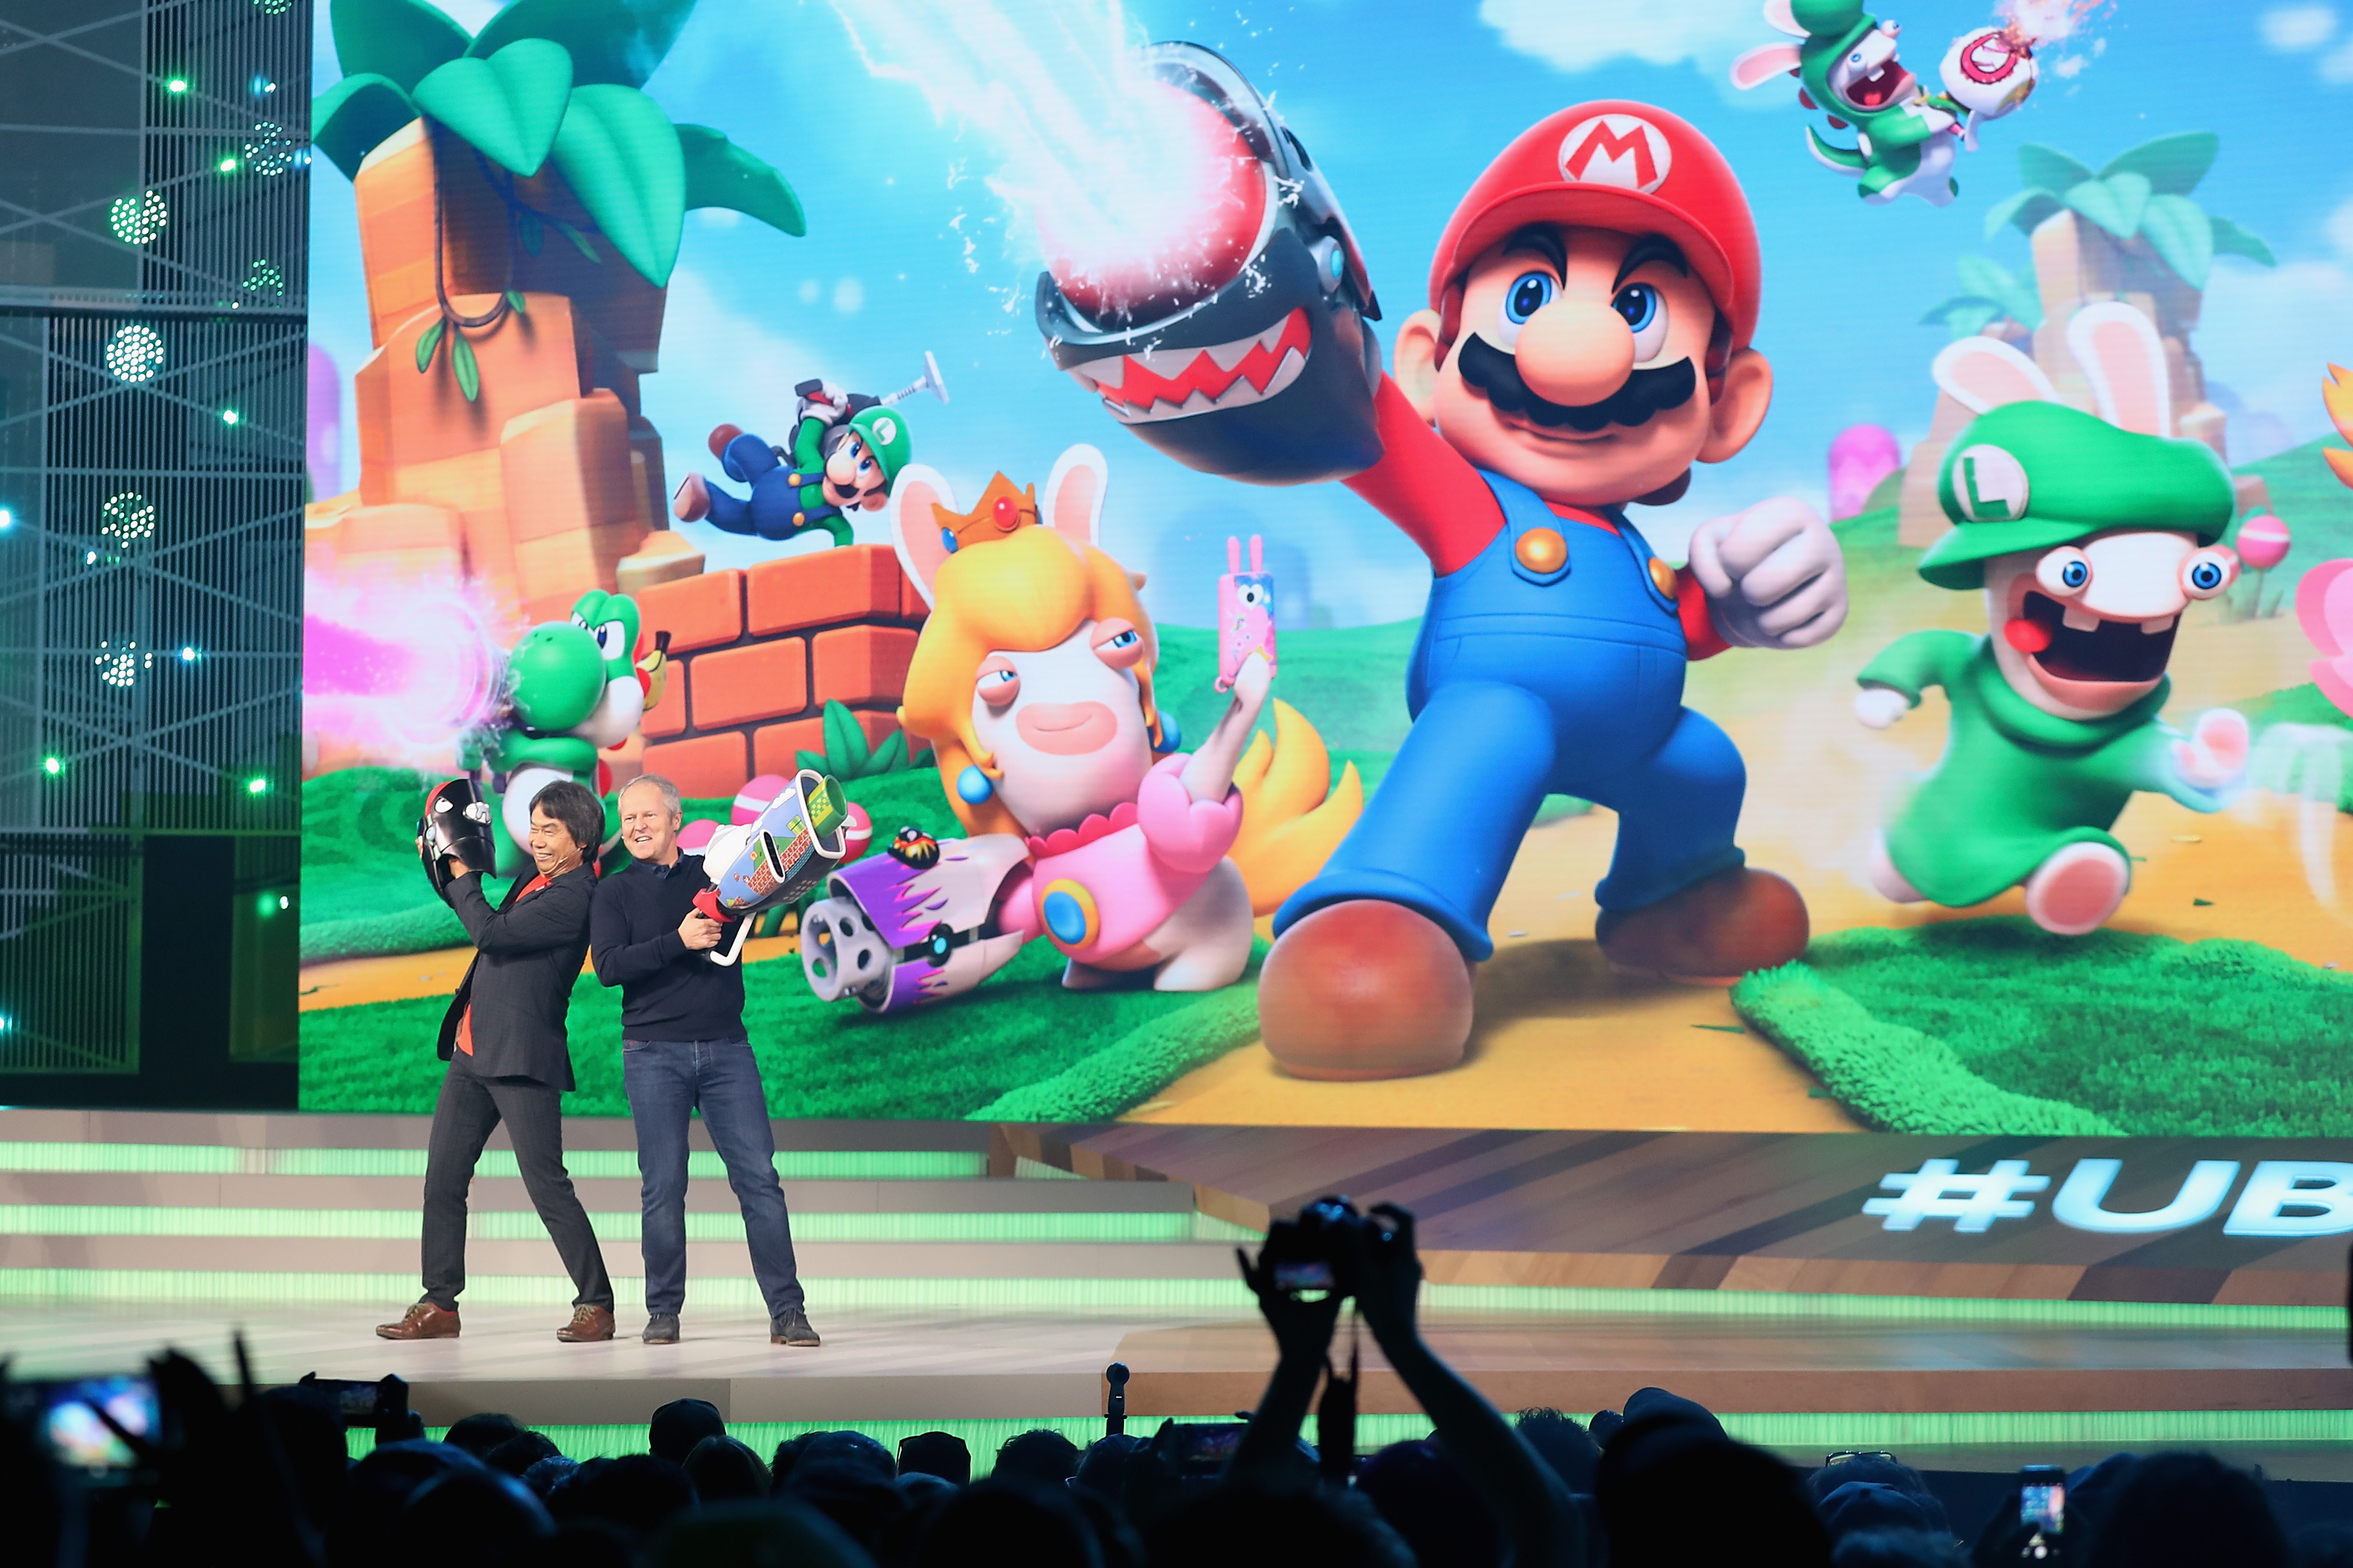 Nintendo co-Representative Director and Creative Fellow Shigeru Miyamoto (L) and Ubisoft Co-founder and CEO Yves Guillemot pose together on stage during the Ubisoft E3 conference at the Orpheum Theater on June 12, 2017 in Los Angeles, California. (Christian Petersen&mdash;Getty Images)